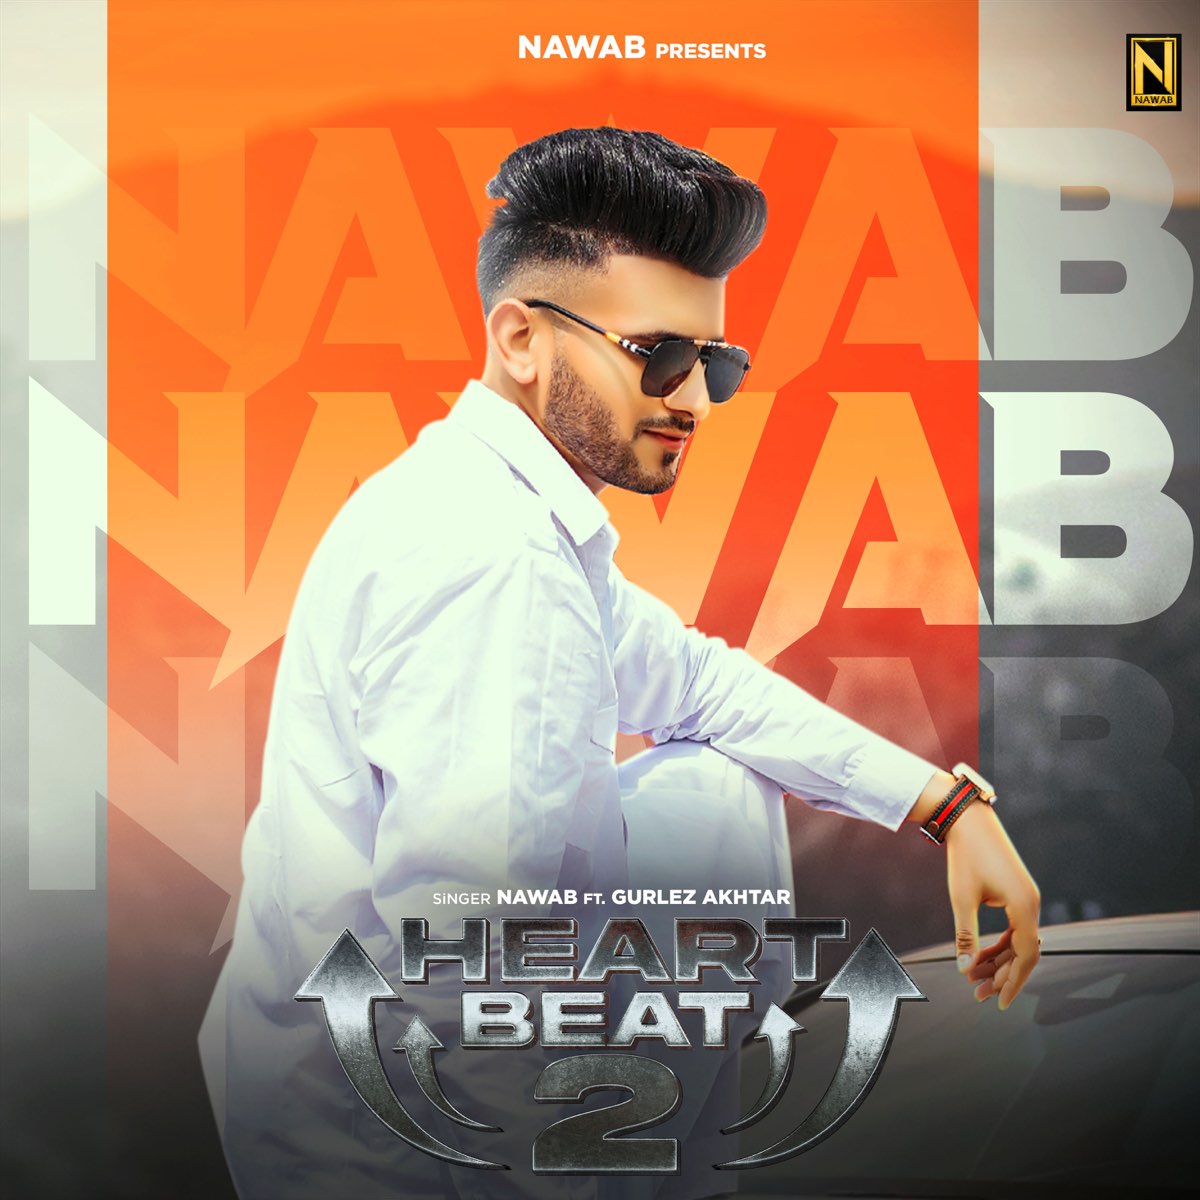 Tattoo (New song) by Nawab: Listen on Audiomack